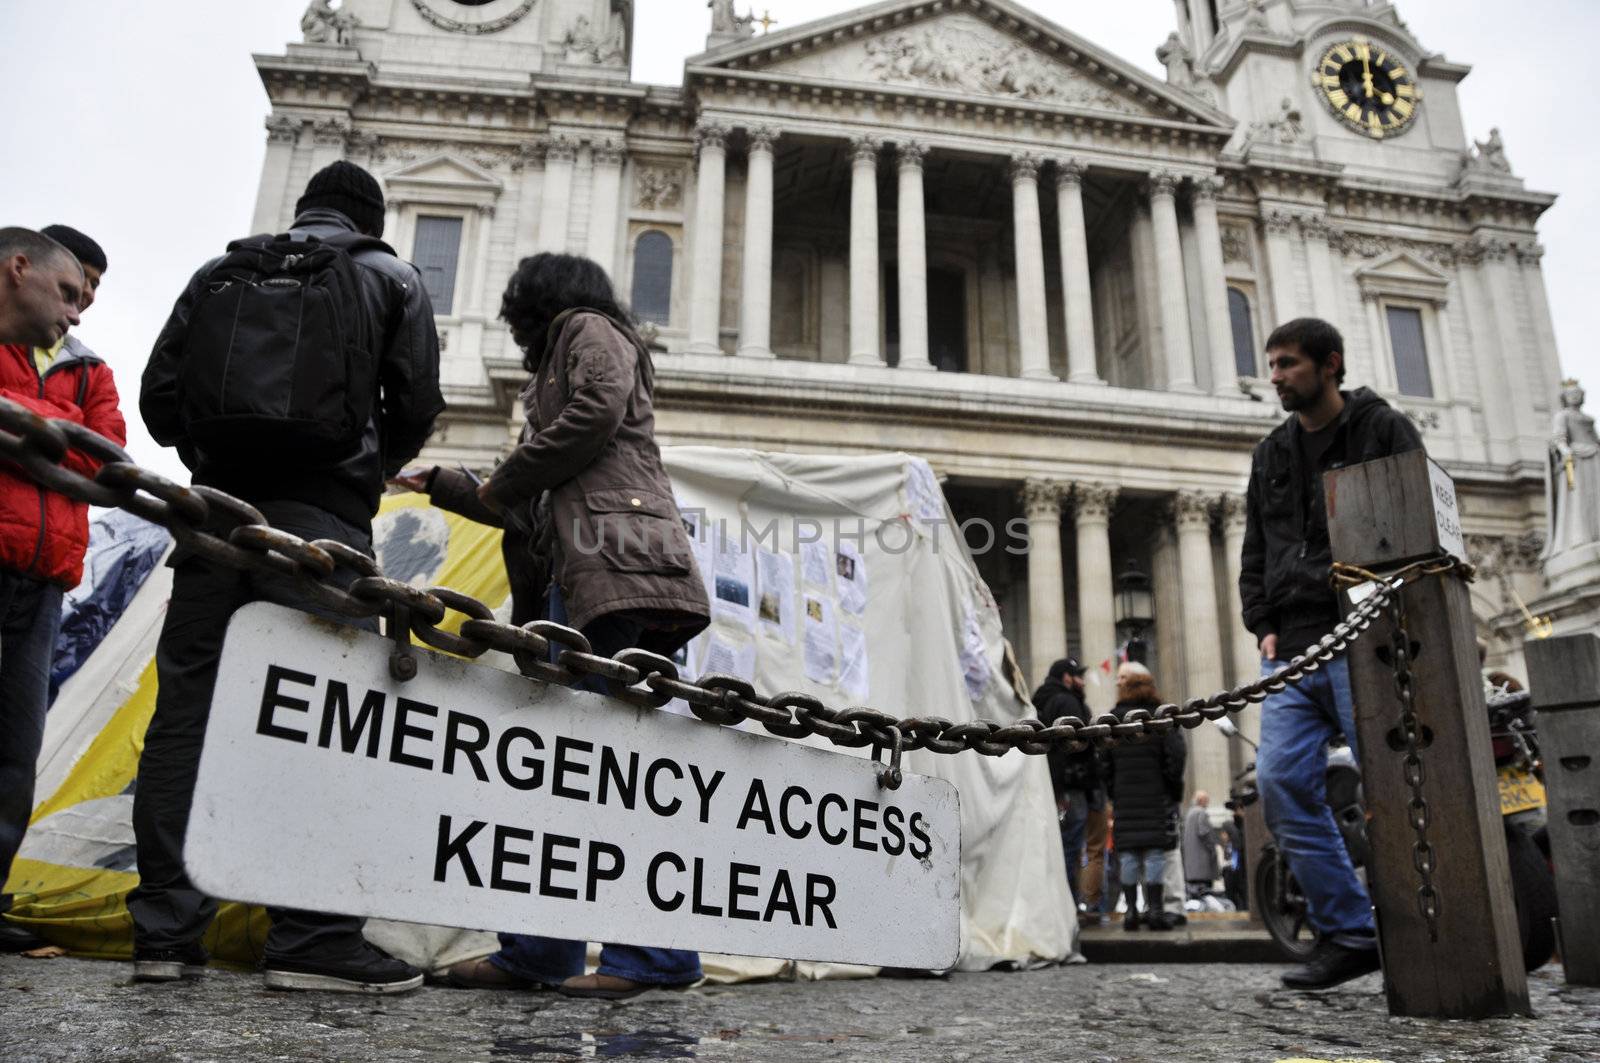 Occupy London encampment at St Paul's Cathedral on October 27, 2011 by dutourdumonde